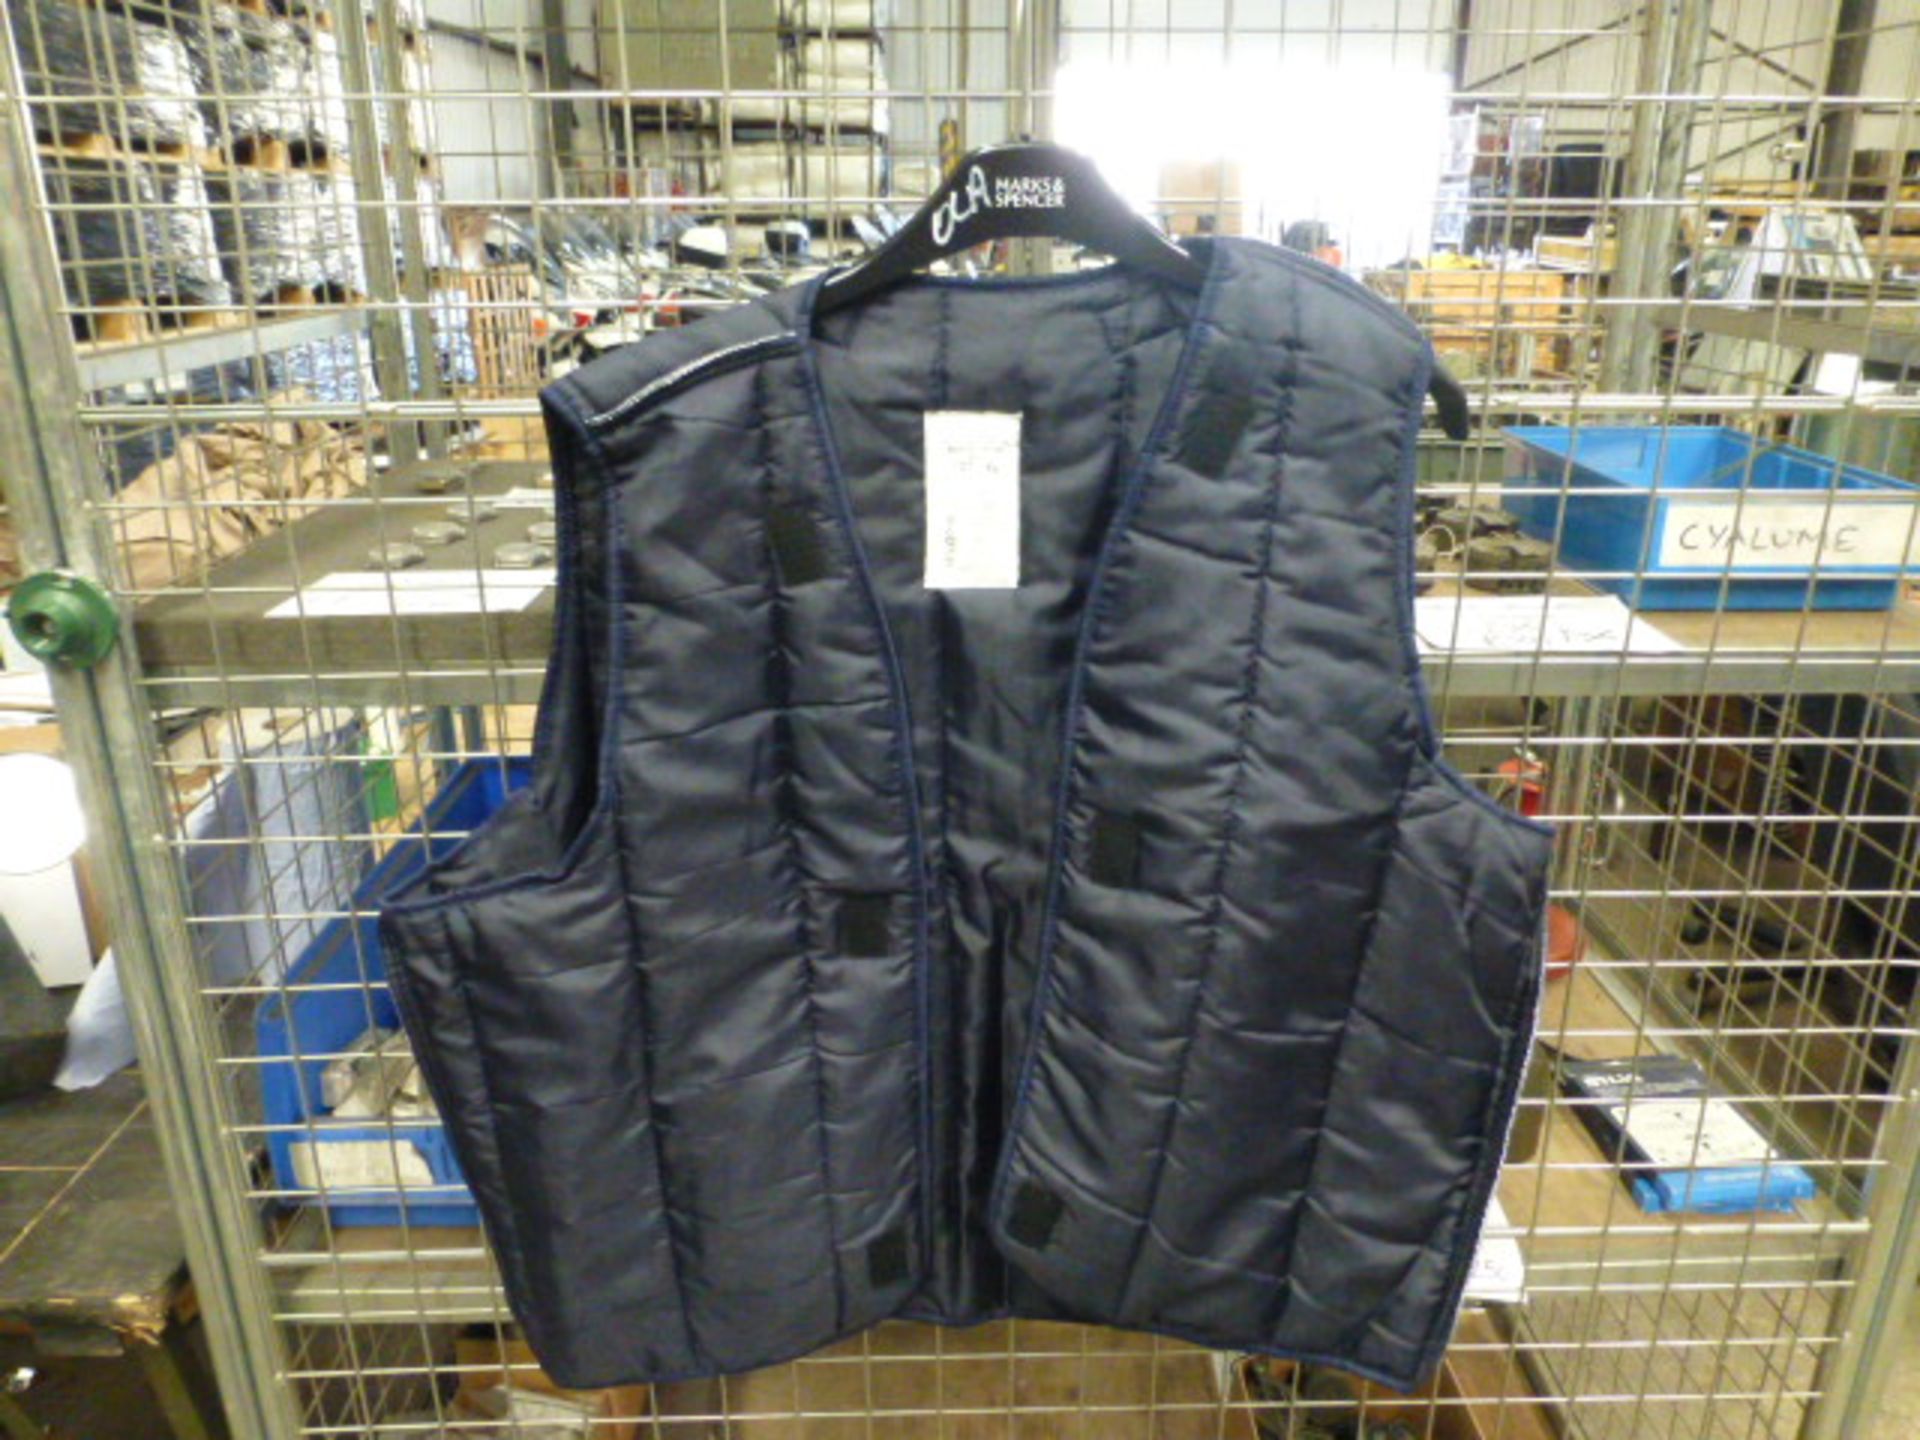 RAF Bomber Jacket with Removable Liner, Size XL - Image 3 of 4